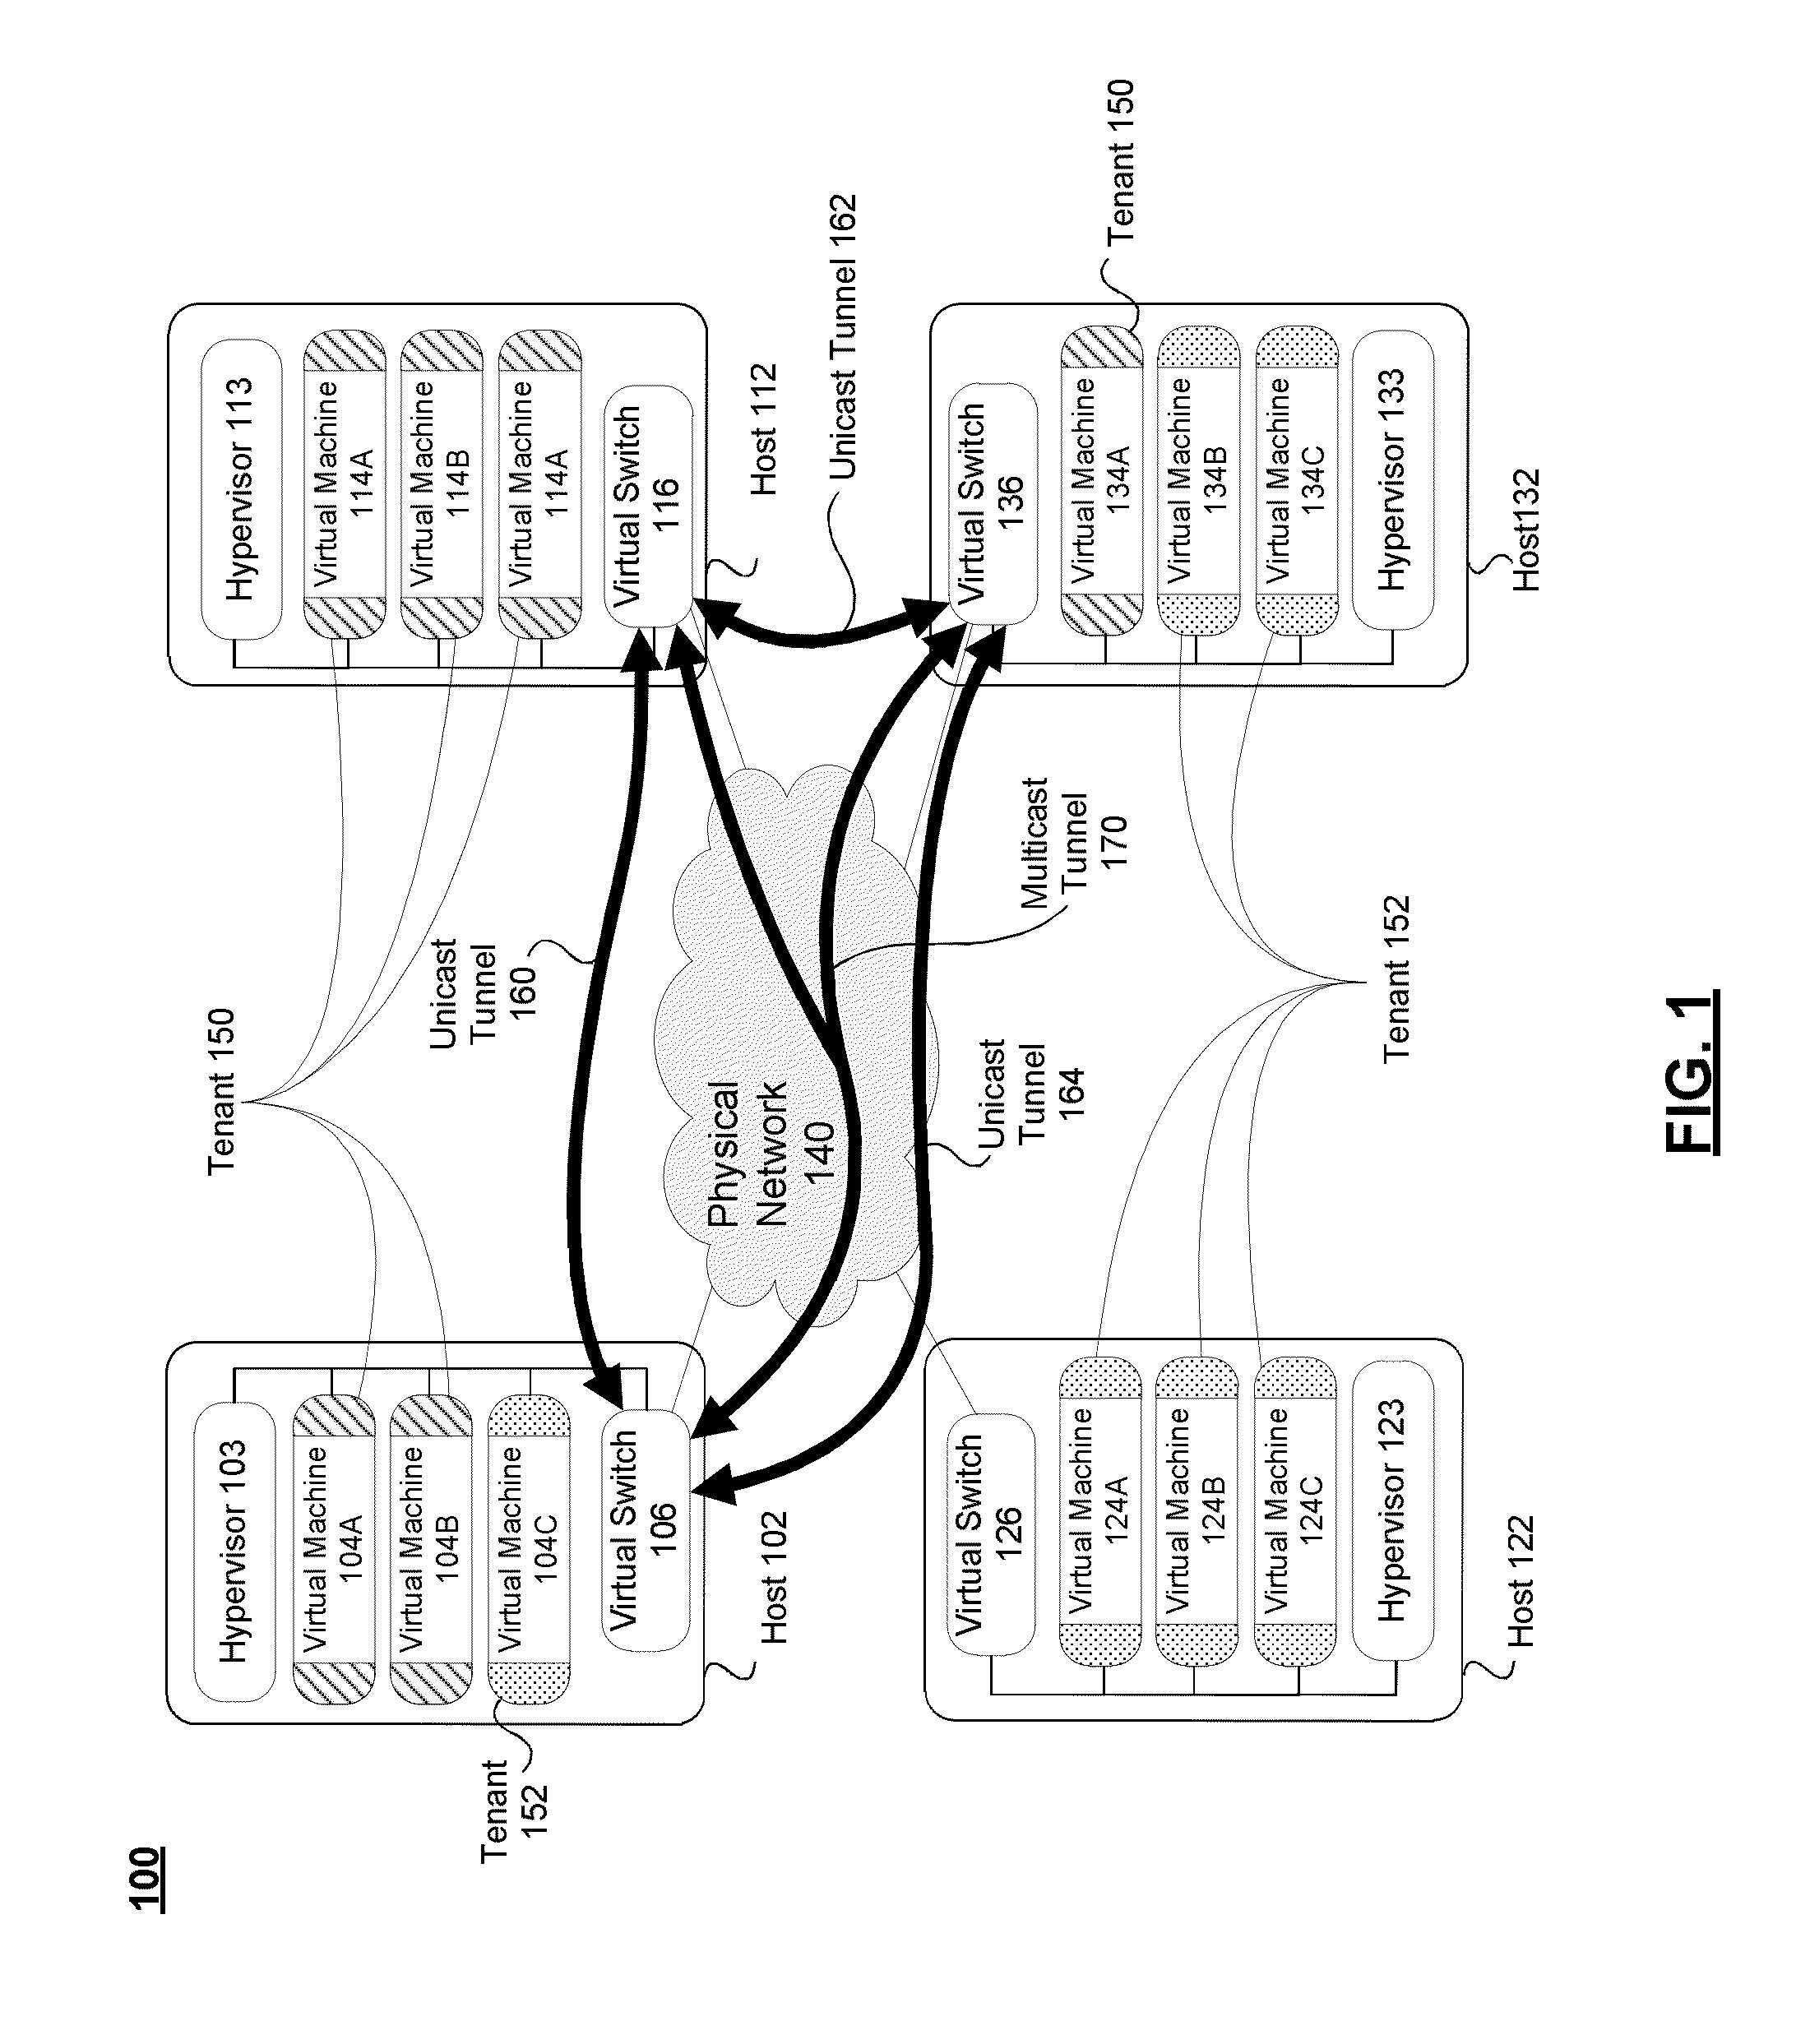 Systems and methods for providing multicast routing in an overlay network